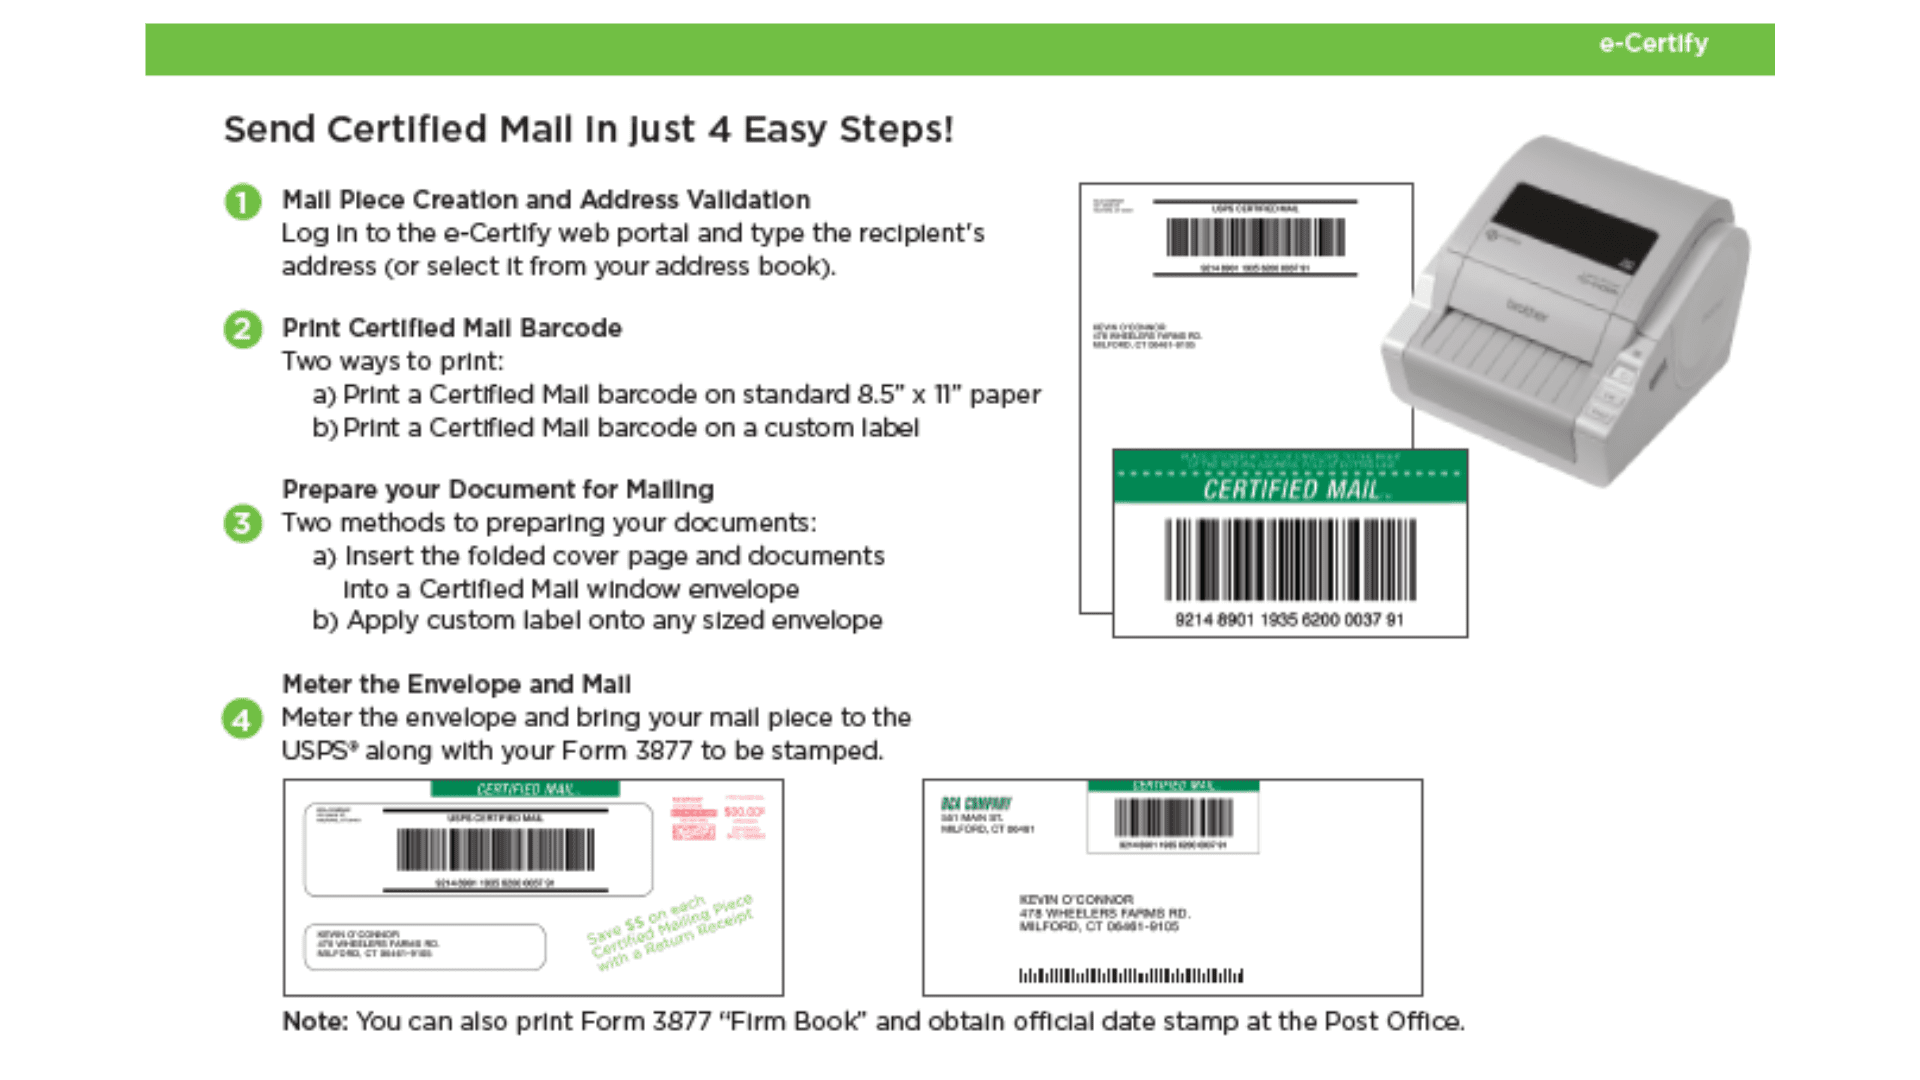 Quadient graphic showing how easy it is to use certified mail in 4 easyt steps - connectsuite e-certify mailing software